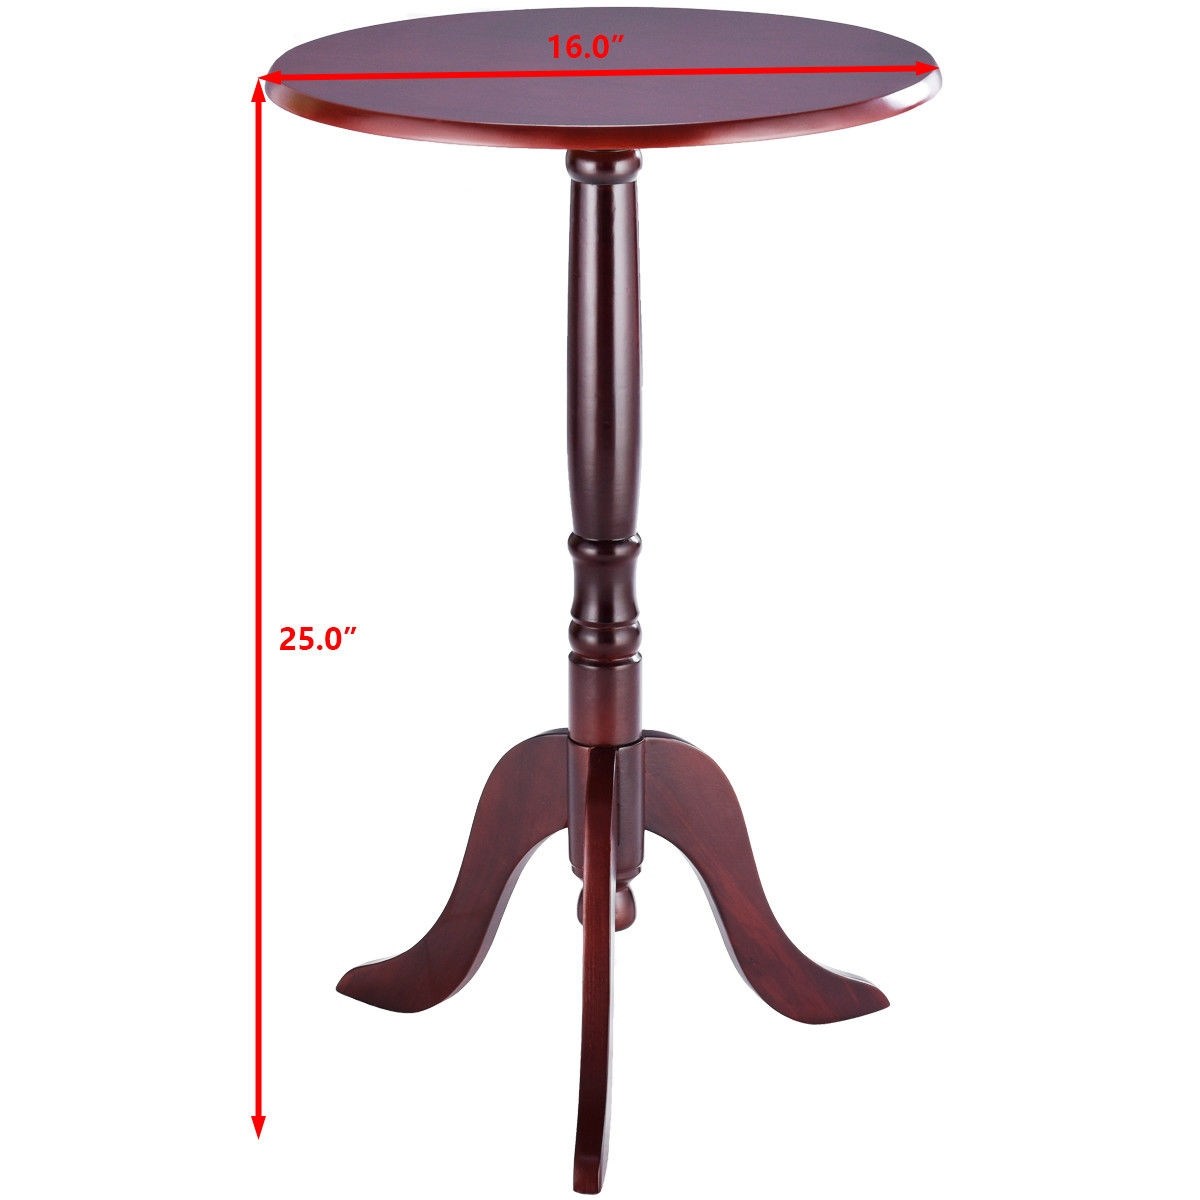 gymax classic round accent table end tea side home mahogany cherry vintage marble top ethan allen dining rod iron tables small outdoor garden furniture rustic wood and metal